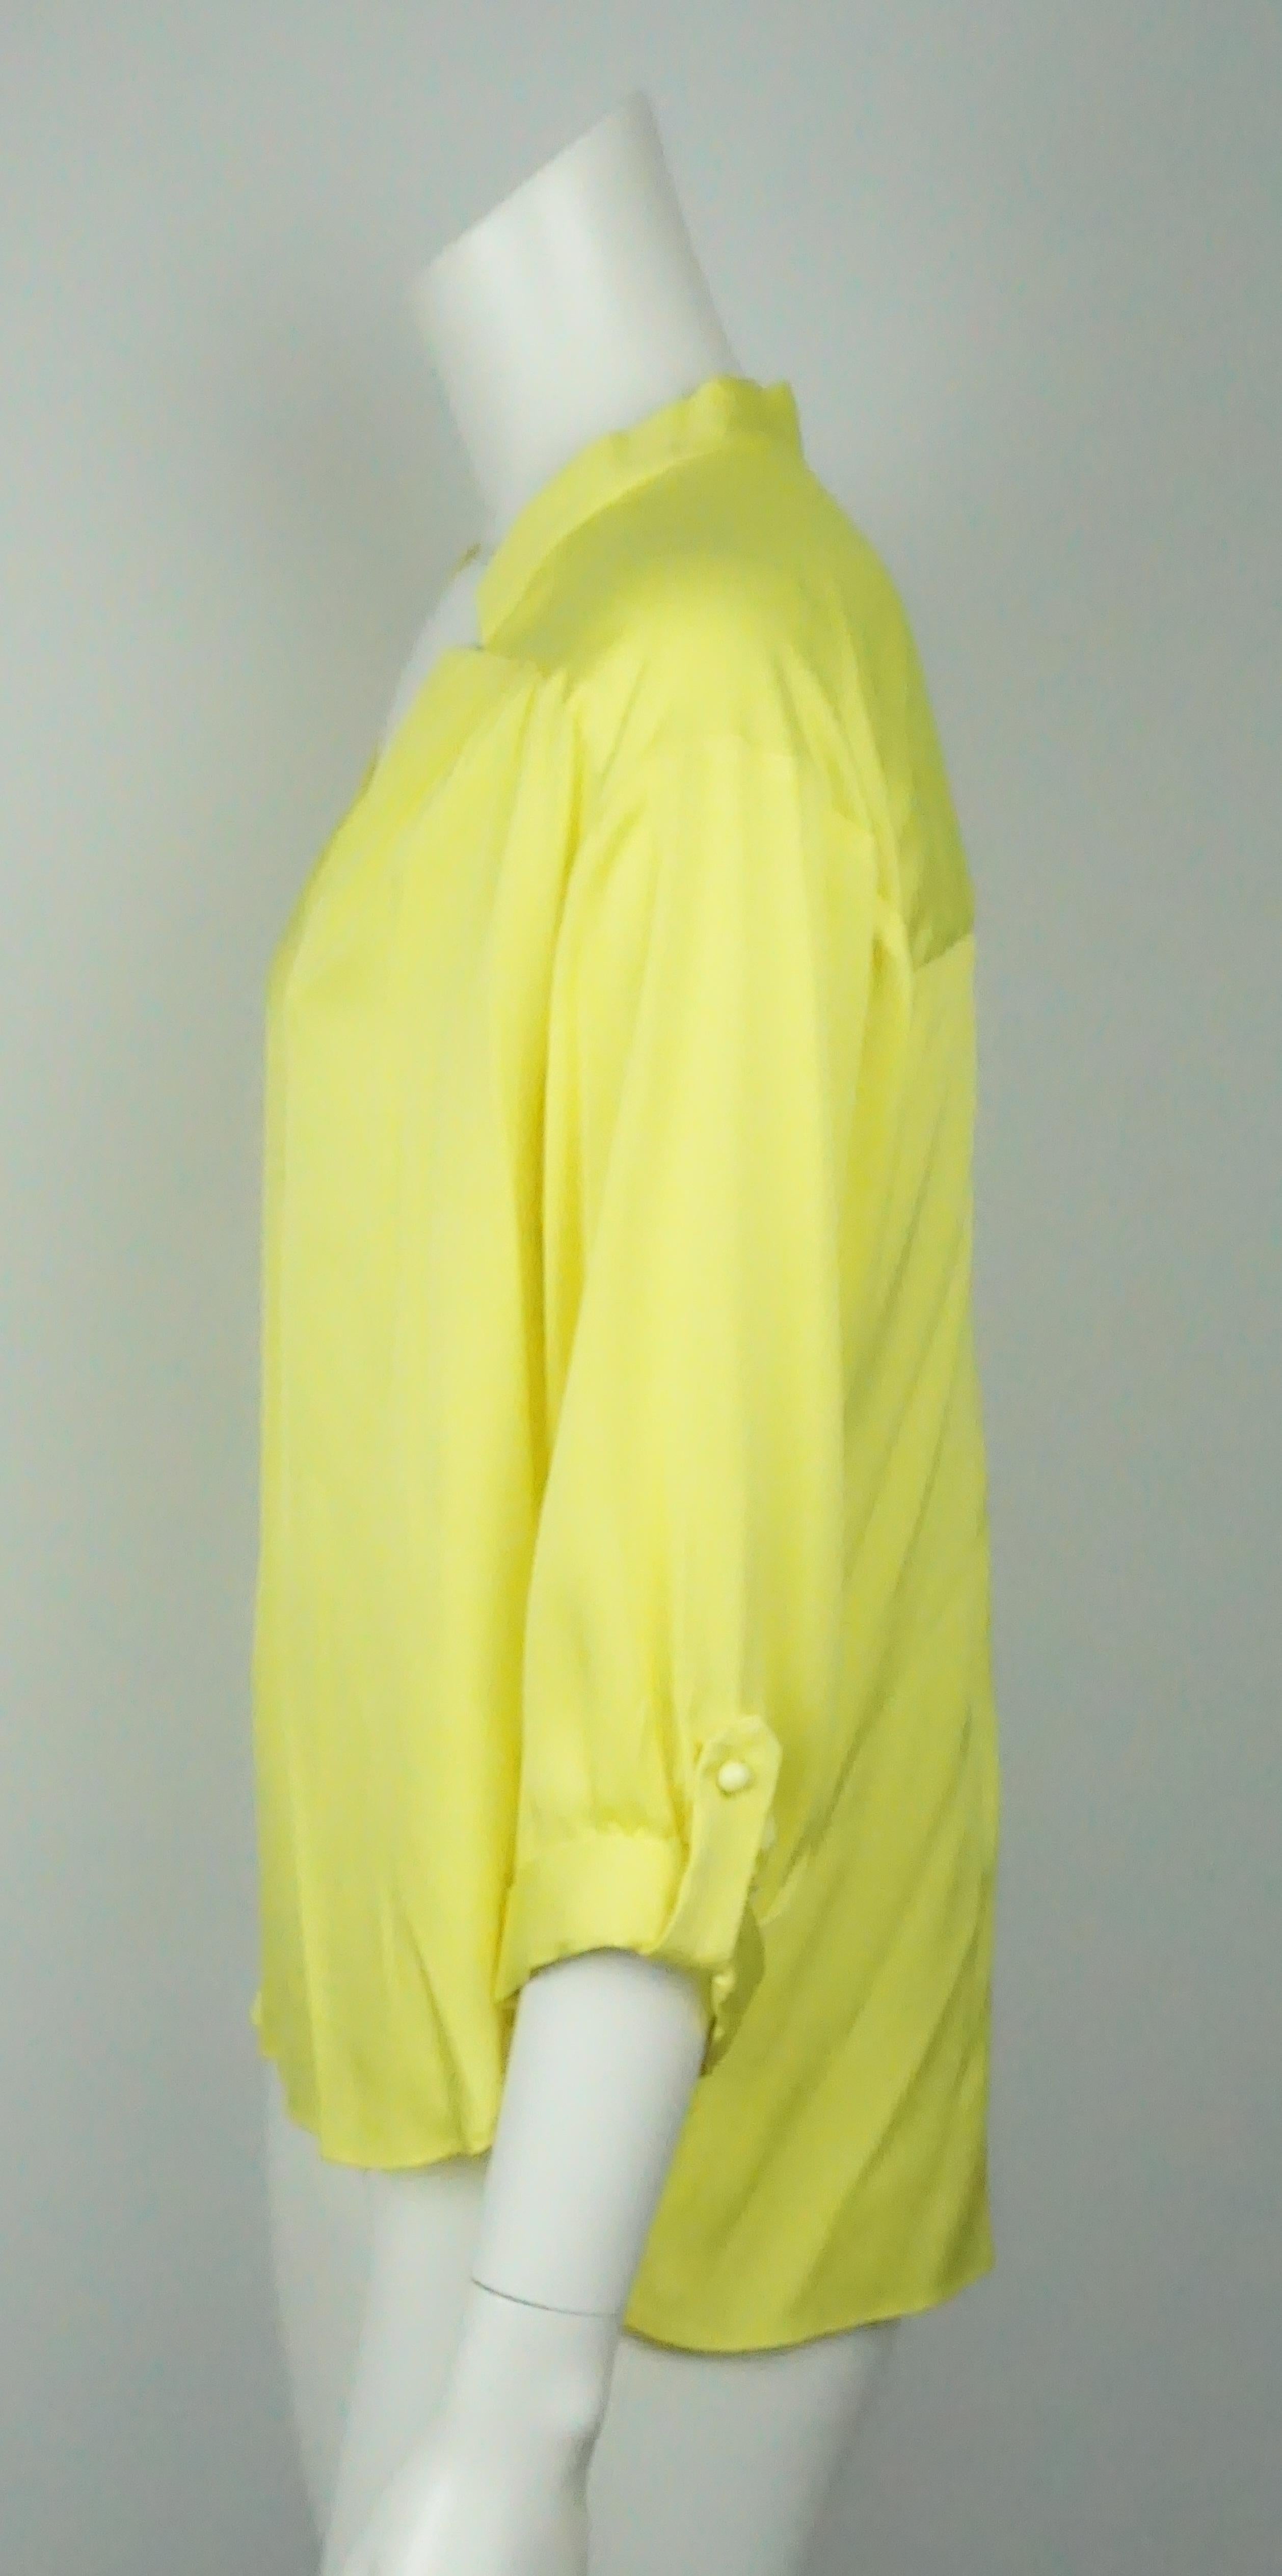 Milly Yellow Silk 3/4 Sleeve Top - 8  This simple yet beautiful top is in excellent condition. The neckline is trimmed with extra fabric that also has a small cutout detail. There are three yellow buttons in the middle that close the top. There is